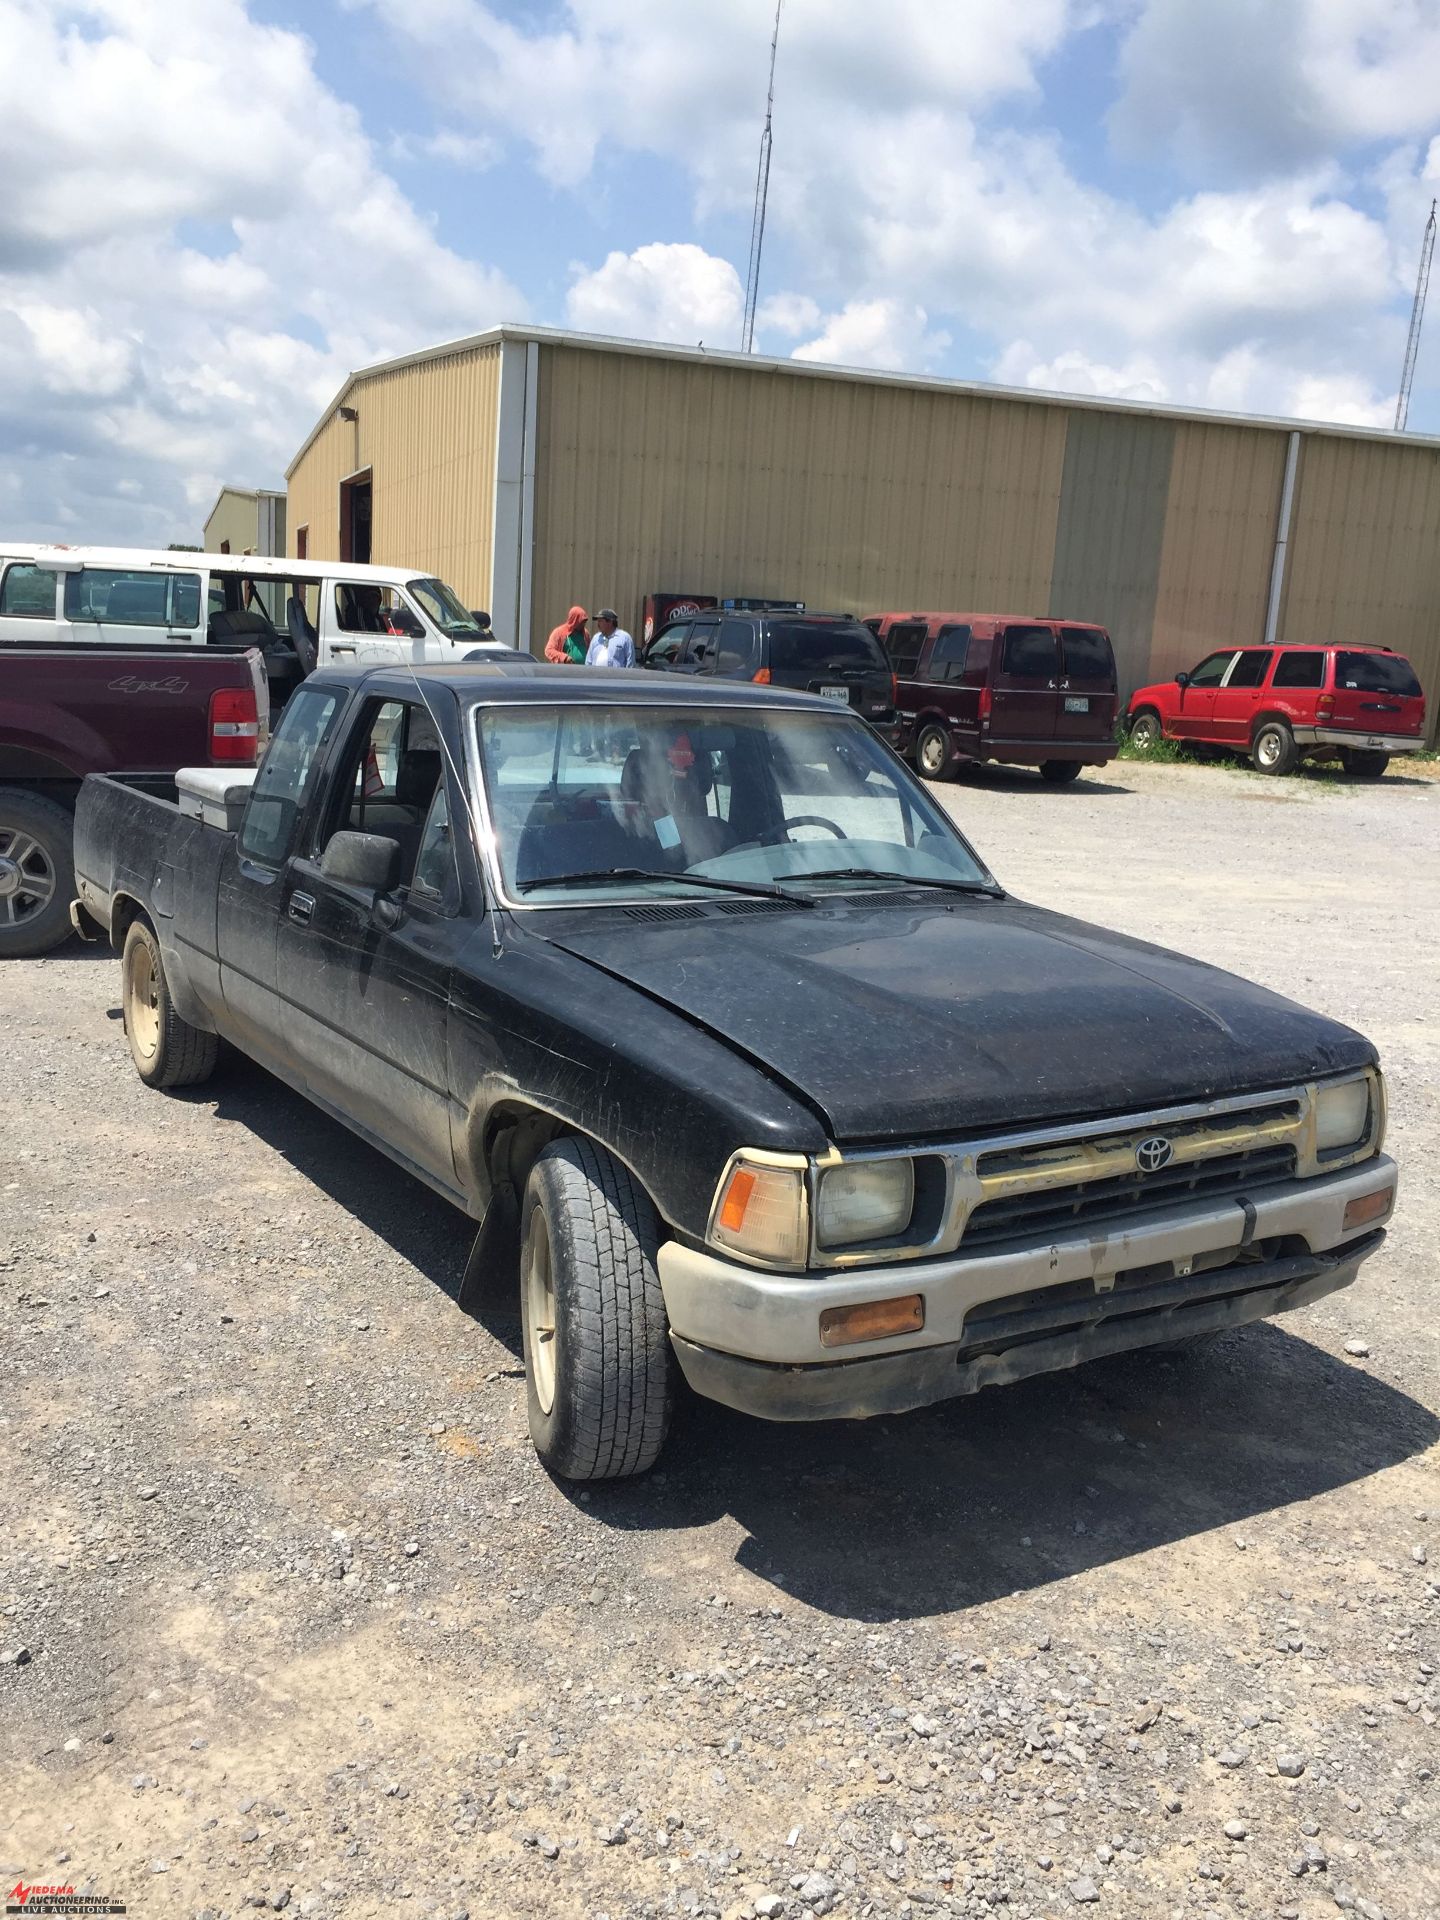 1994 TOYOTA EXTENDED CAB PICKUP TRUCK, LONG BOX, 4-CYLINDER GAS ENGINE, AUTOMATIC TRANS, ASSORTED - Image 2 of 6